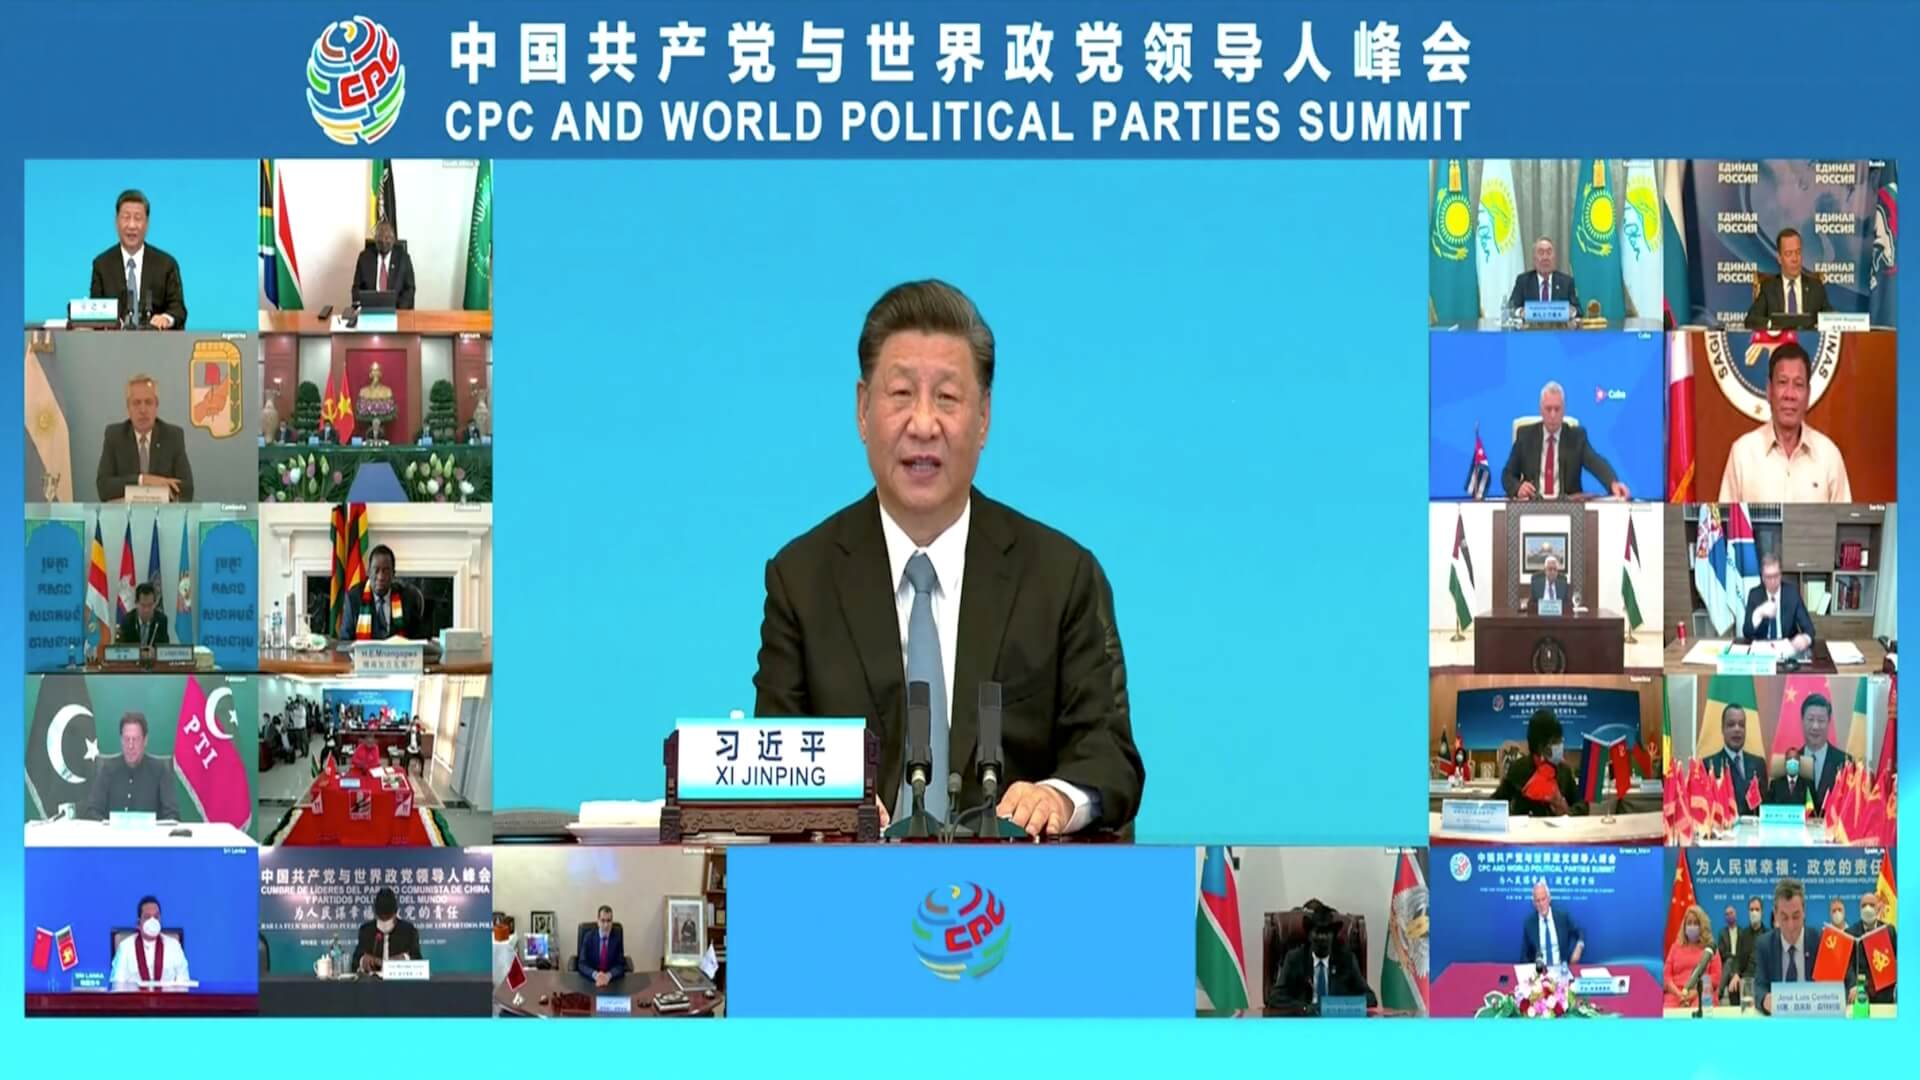 SUMMARY: Xi’s Speech at the Communist Party of China and World Political Parties Summit